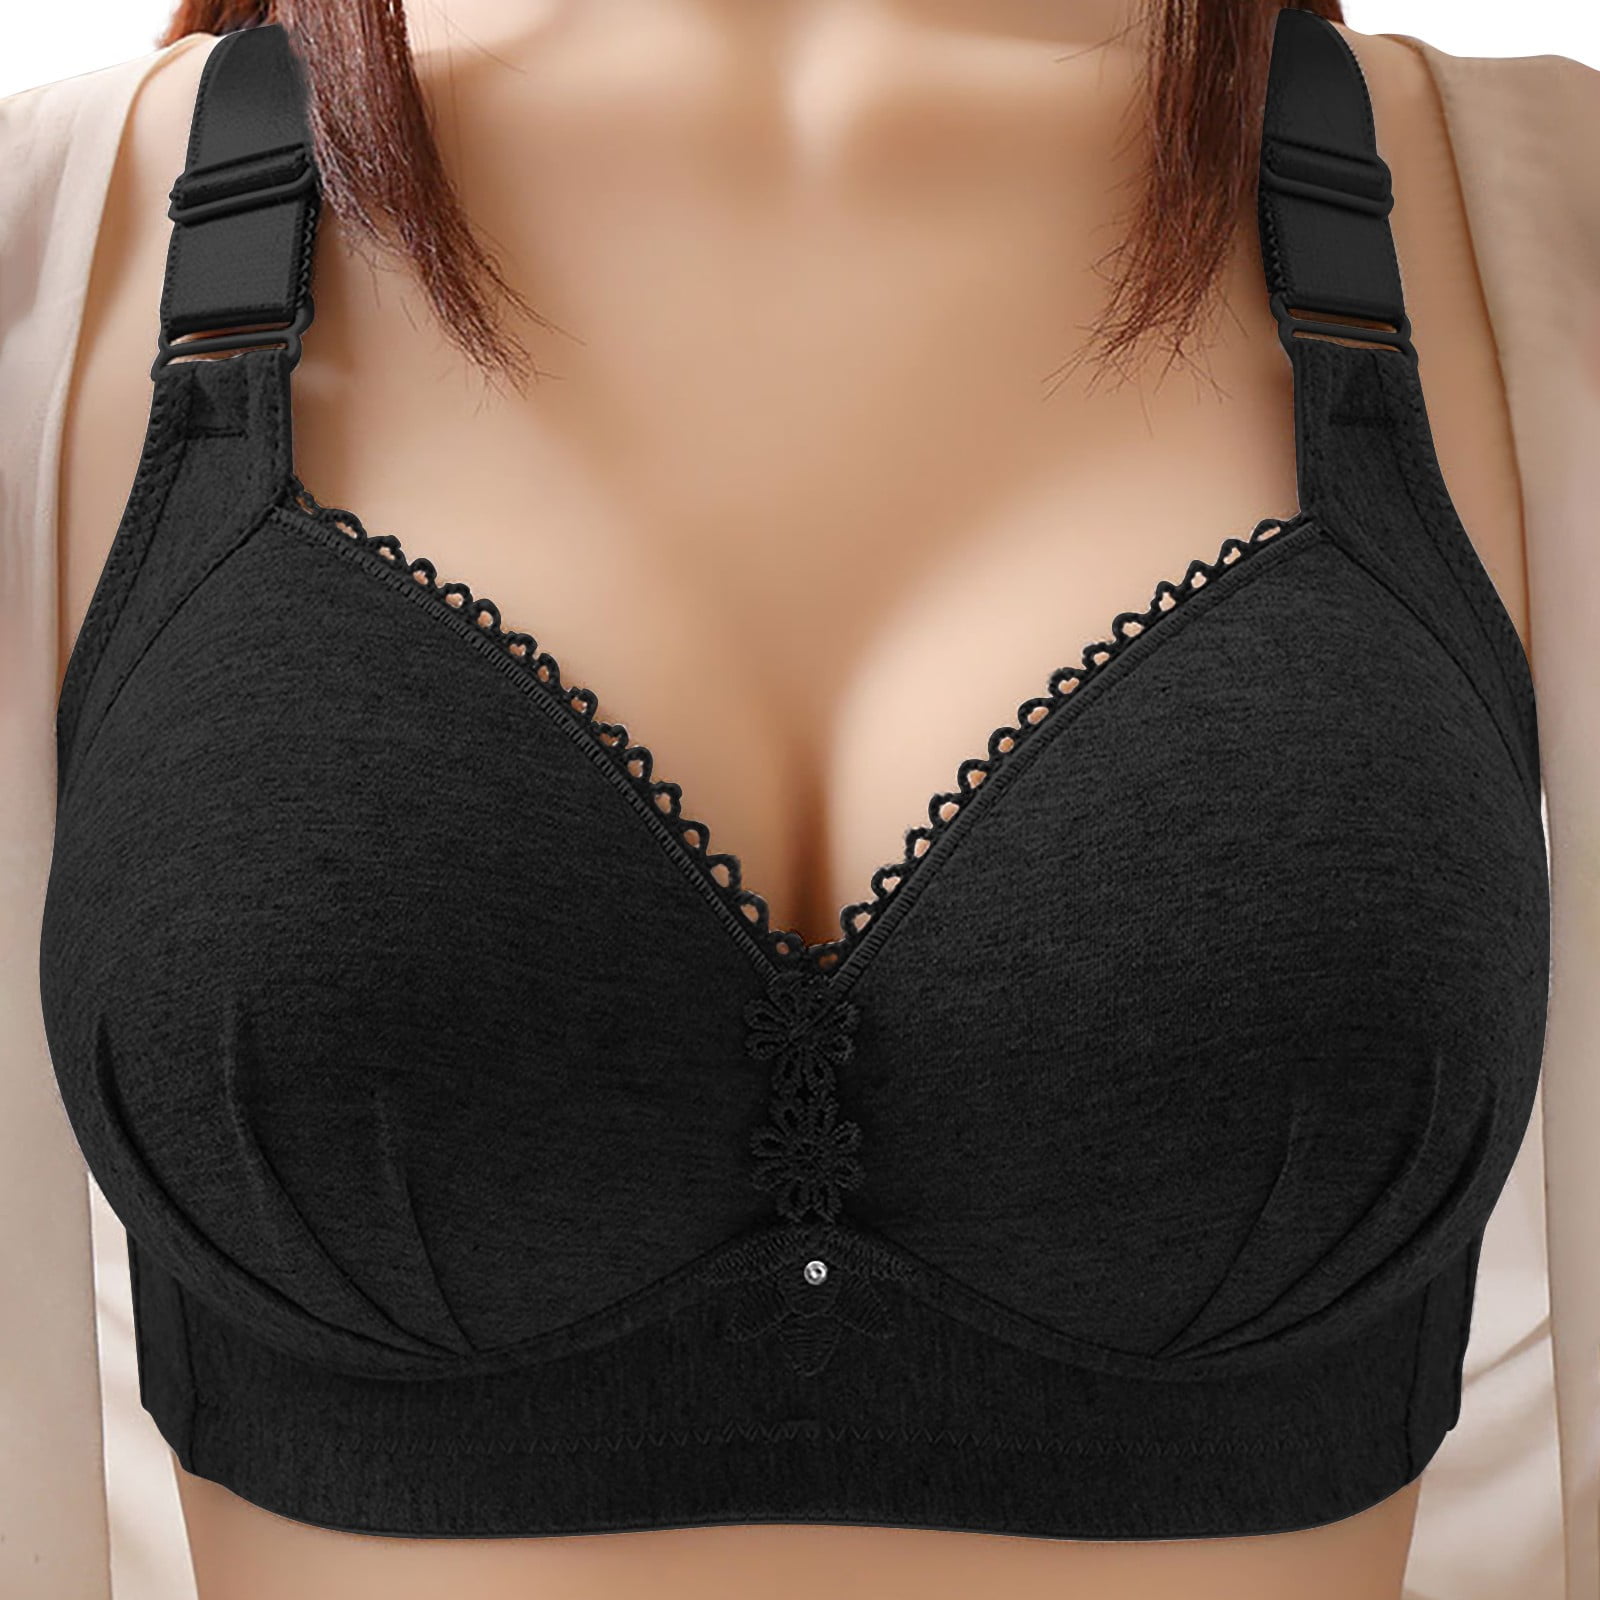 Back Smoothing Bras for Women Button Shapin Adjustable Shoulder Strap  Shapermint Bra for Womens Wirefree Black 38 